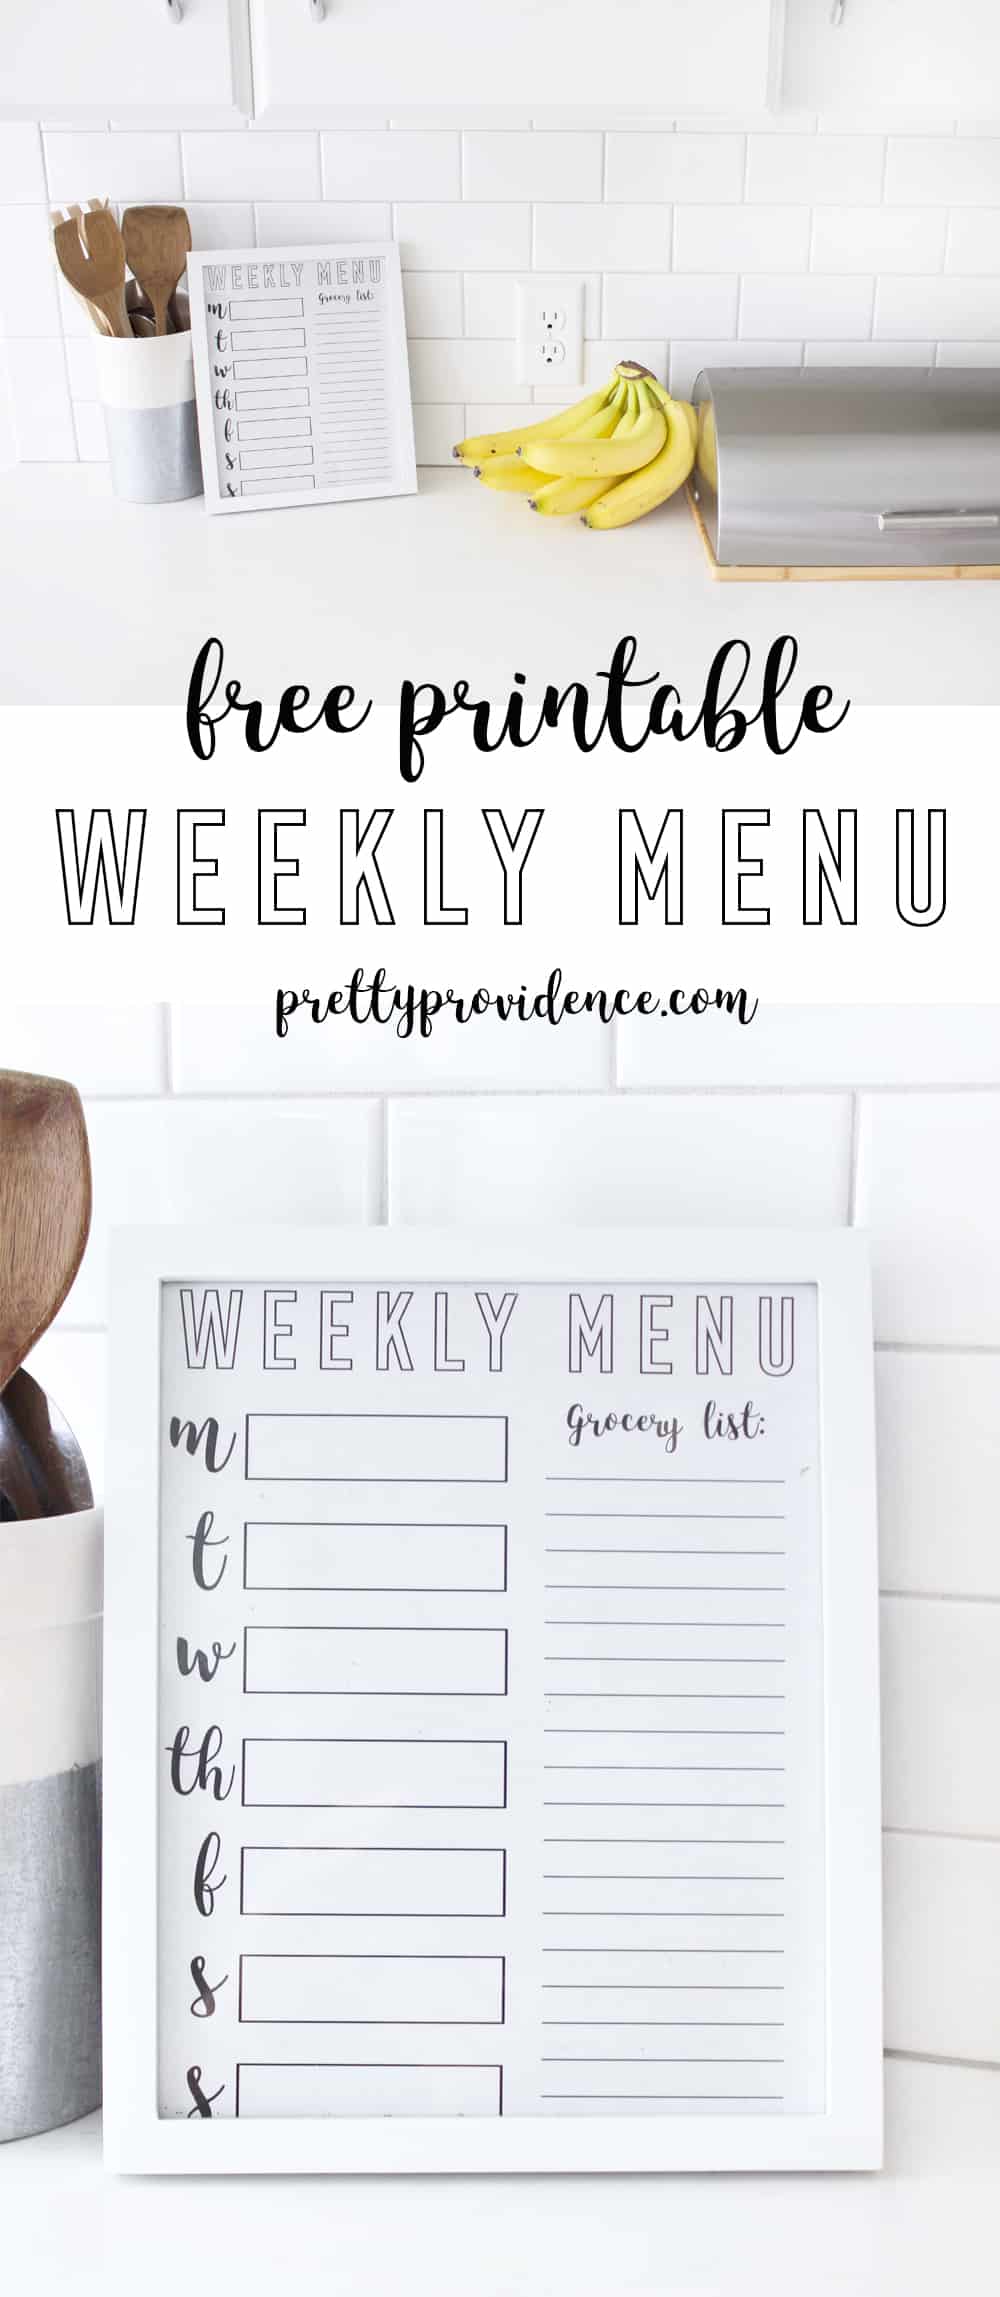 I love this weekly meal planner printable! Just laminate or stick in a frame and re-use every week! Helps so much to know ahead of time what to make for dinner! 